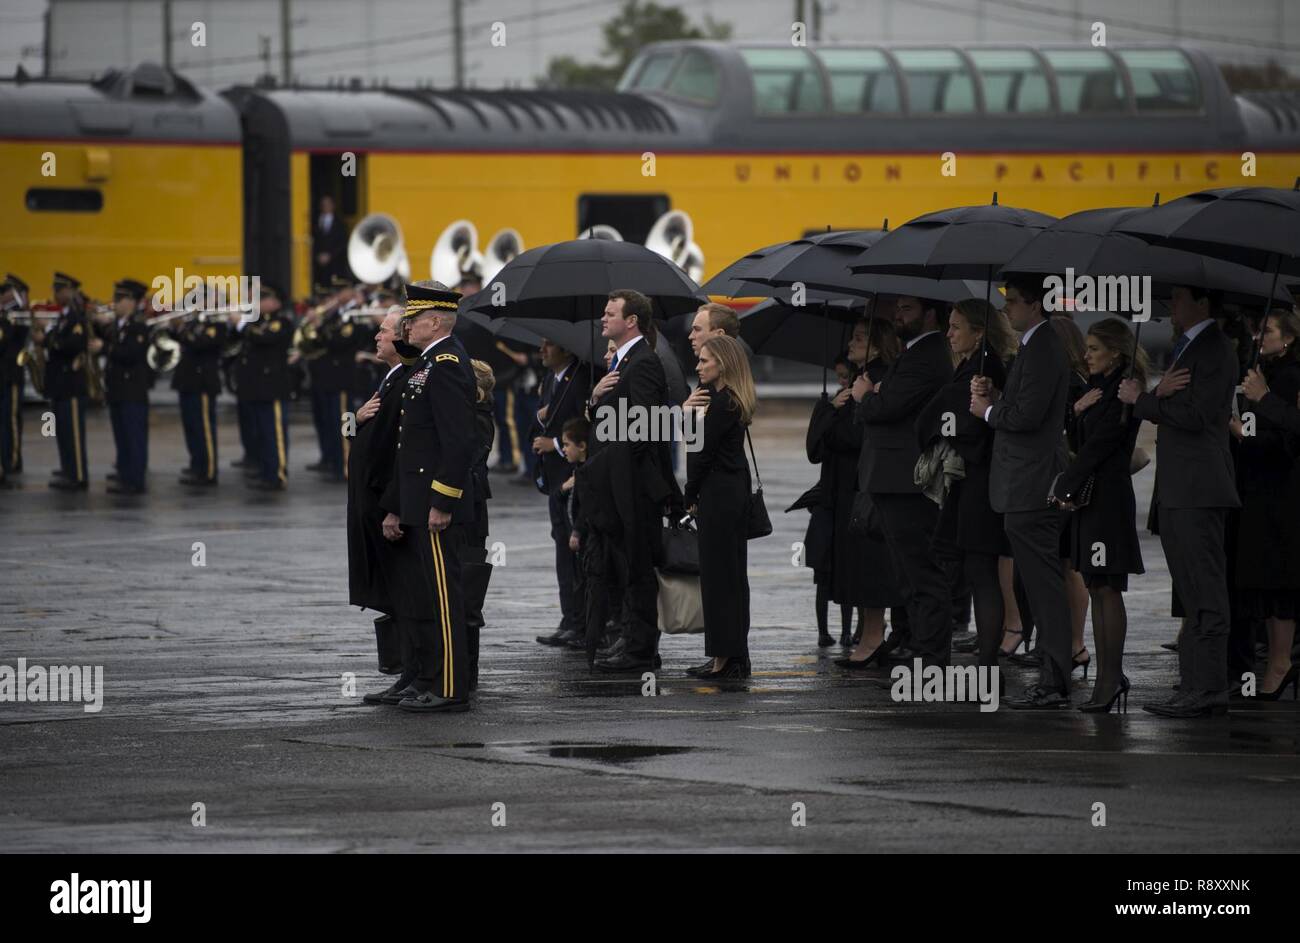 Former President George W. Bush, former First Lady Laura Bush and other family members observe as George H.W. Bush’s casket is moved to the funeral car during a departure ceremony at Union Pacific Westfield Auto Facility, Spring, Texas, Dec. 6, 2018. The funeral car was pulled by the 4141 locomotive and carried George H.W. Bush's remains toward his final resting place. Nearly 4,000 military and civilian personnel from across all branches of the U.S. armed forces, including Reserve and National Guard components, provided ceremonial support during the state funeral of George H.W. Bush, the 41st  Stock Photo